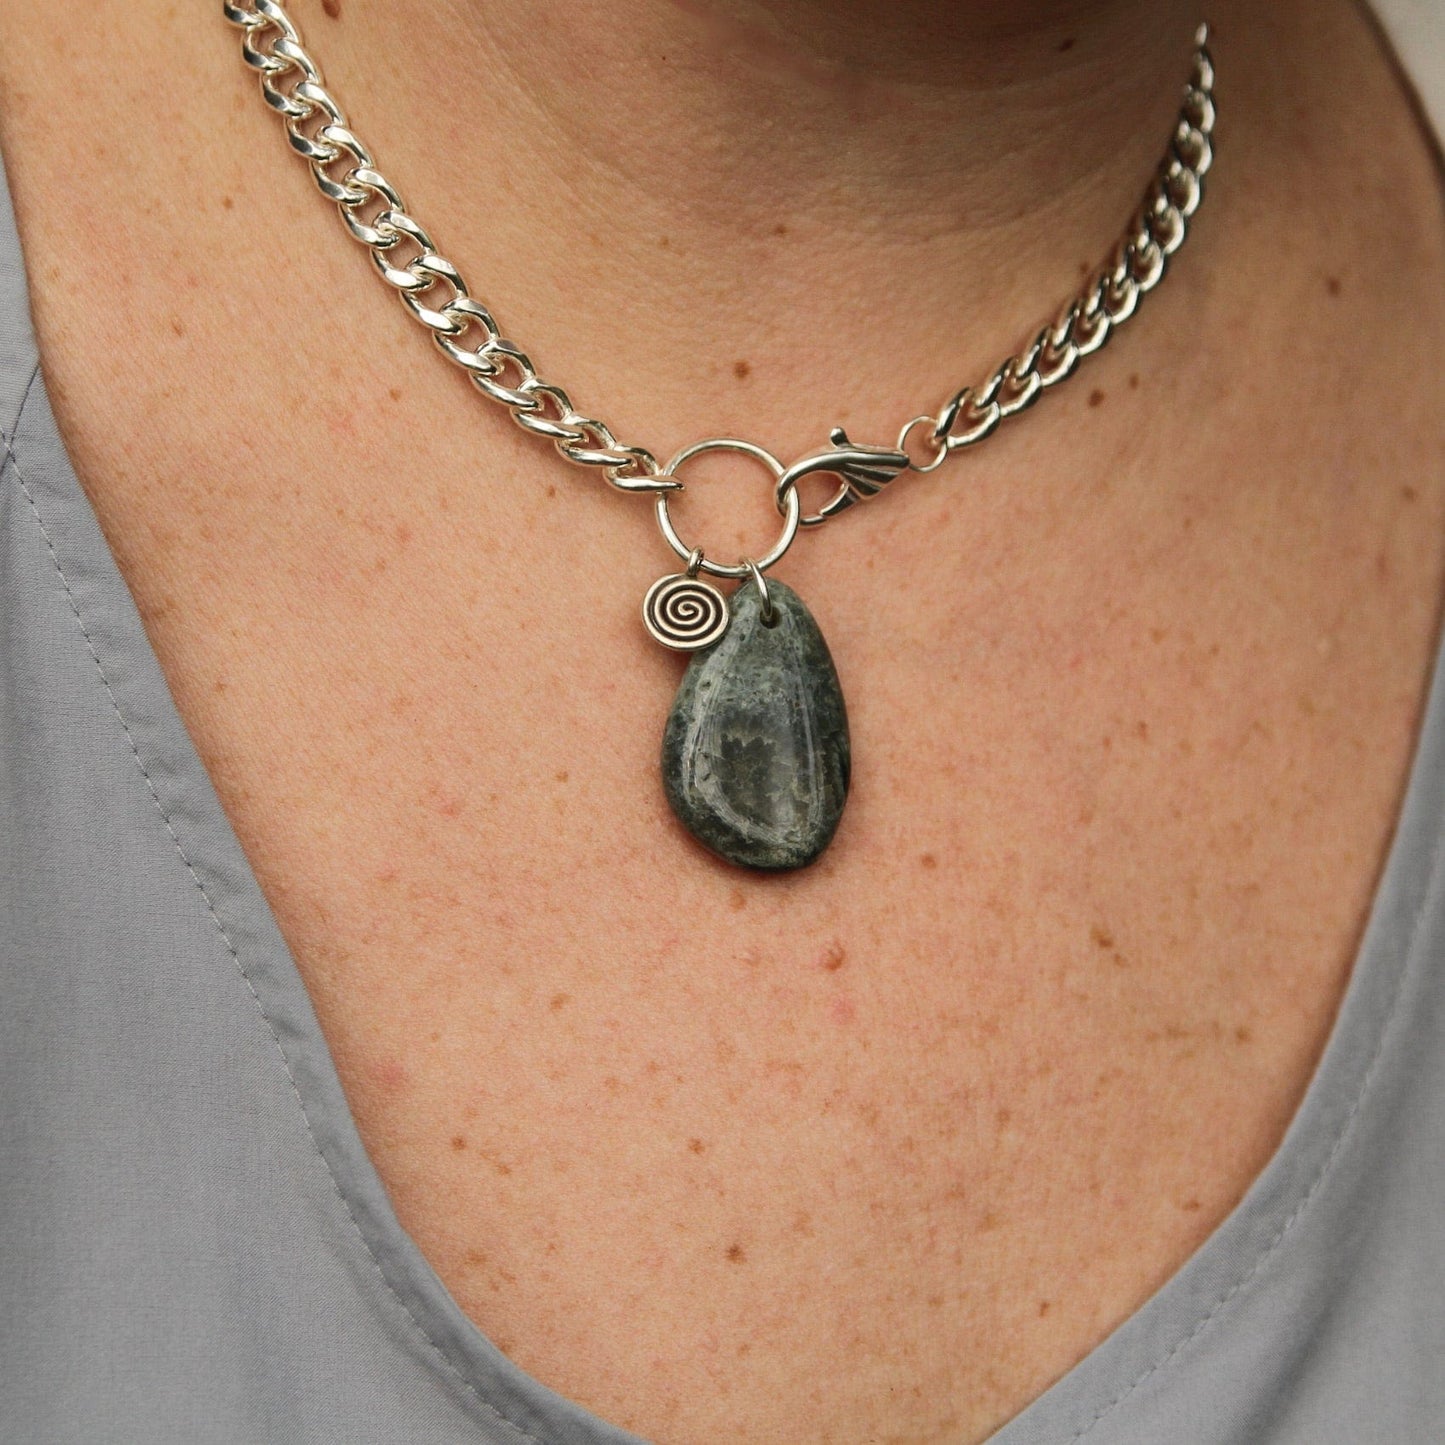 NKL One of a Kind Dewdrop Green Agate Necklace